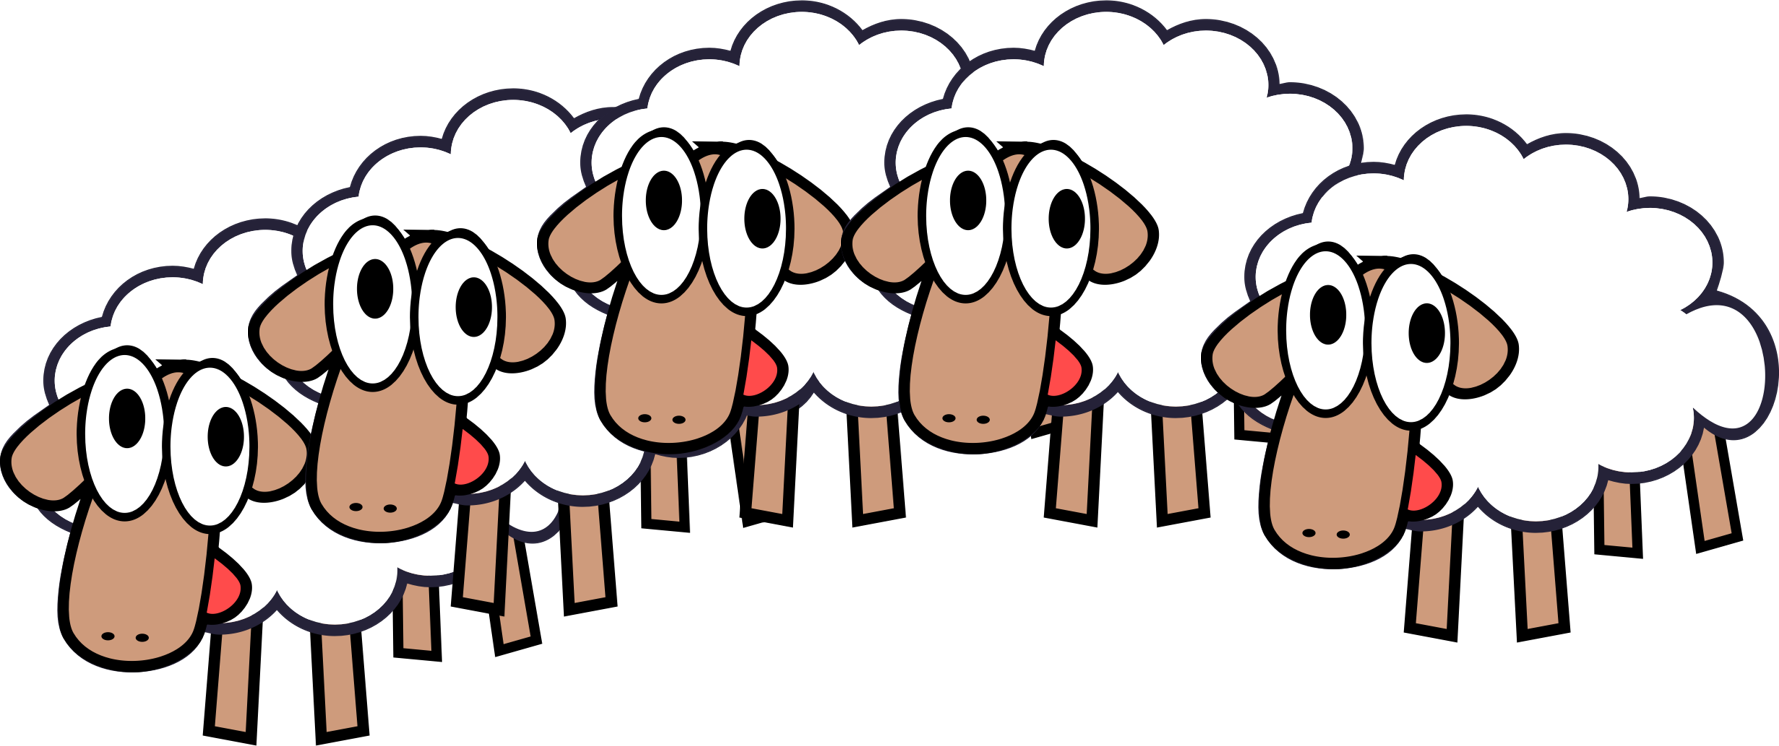 group clipart sheeps